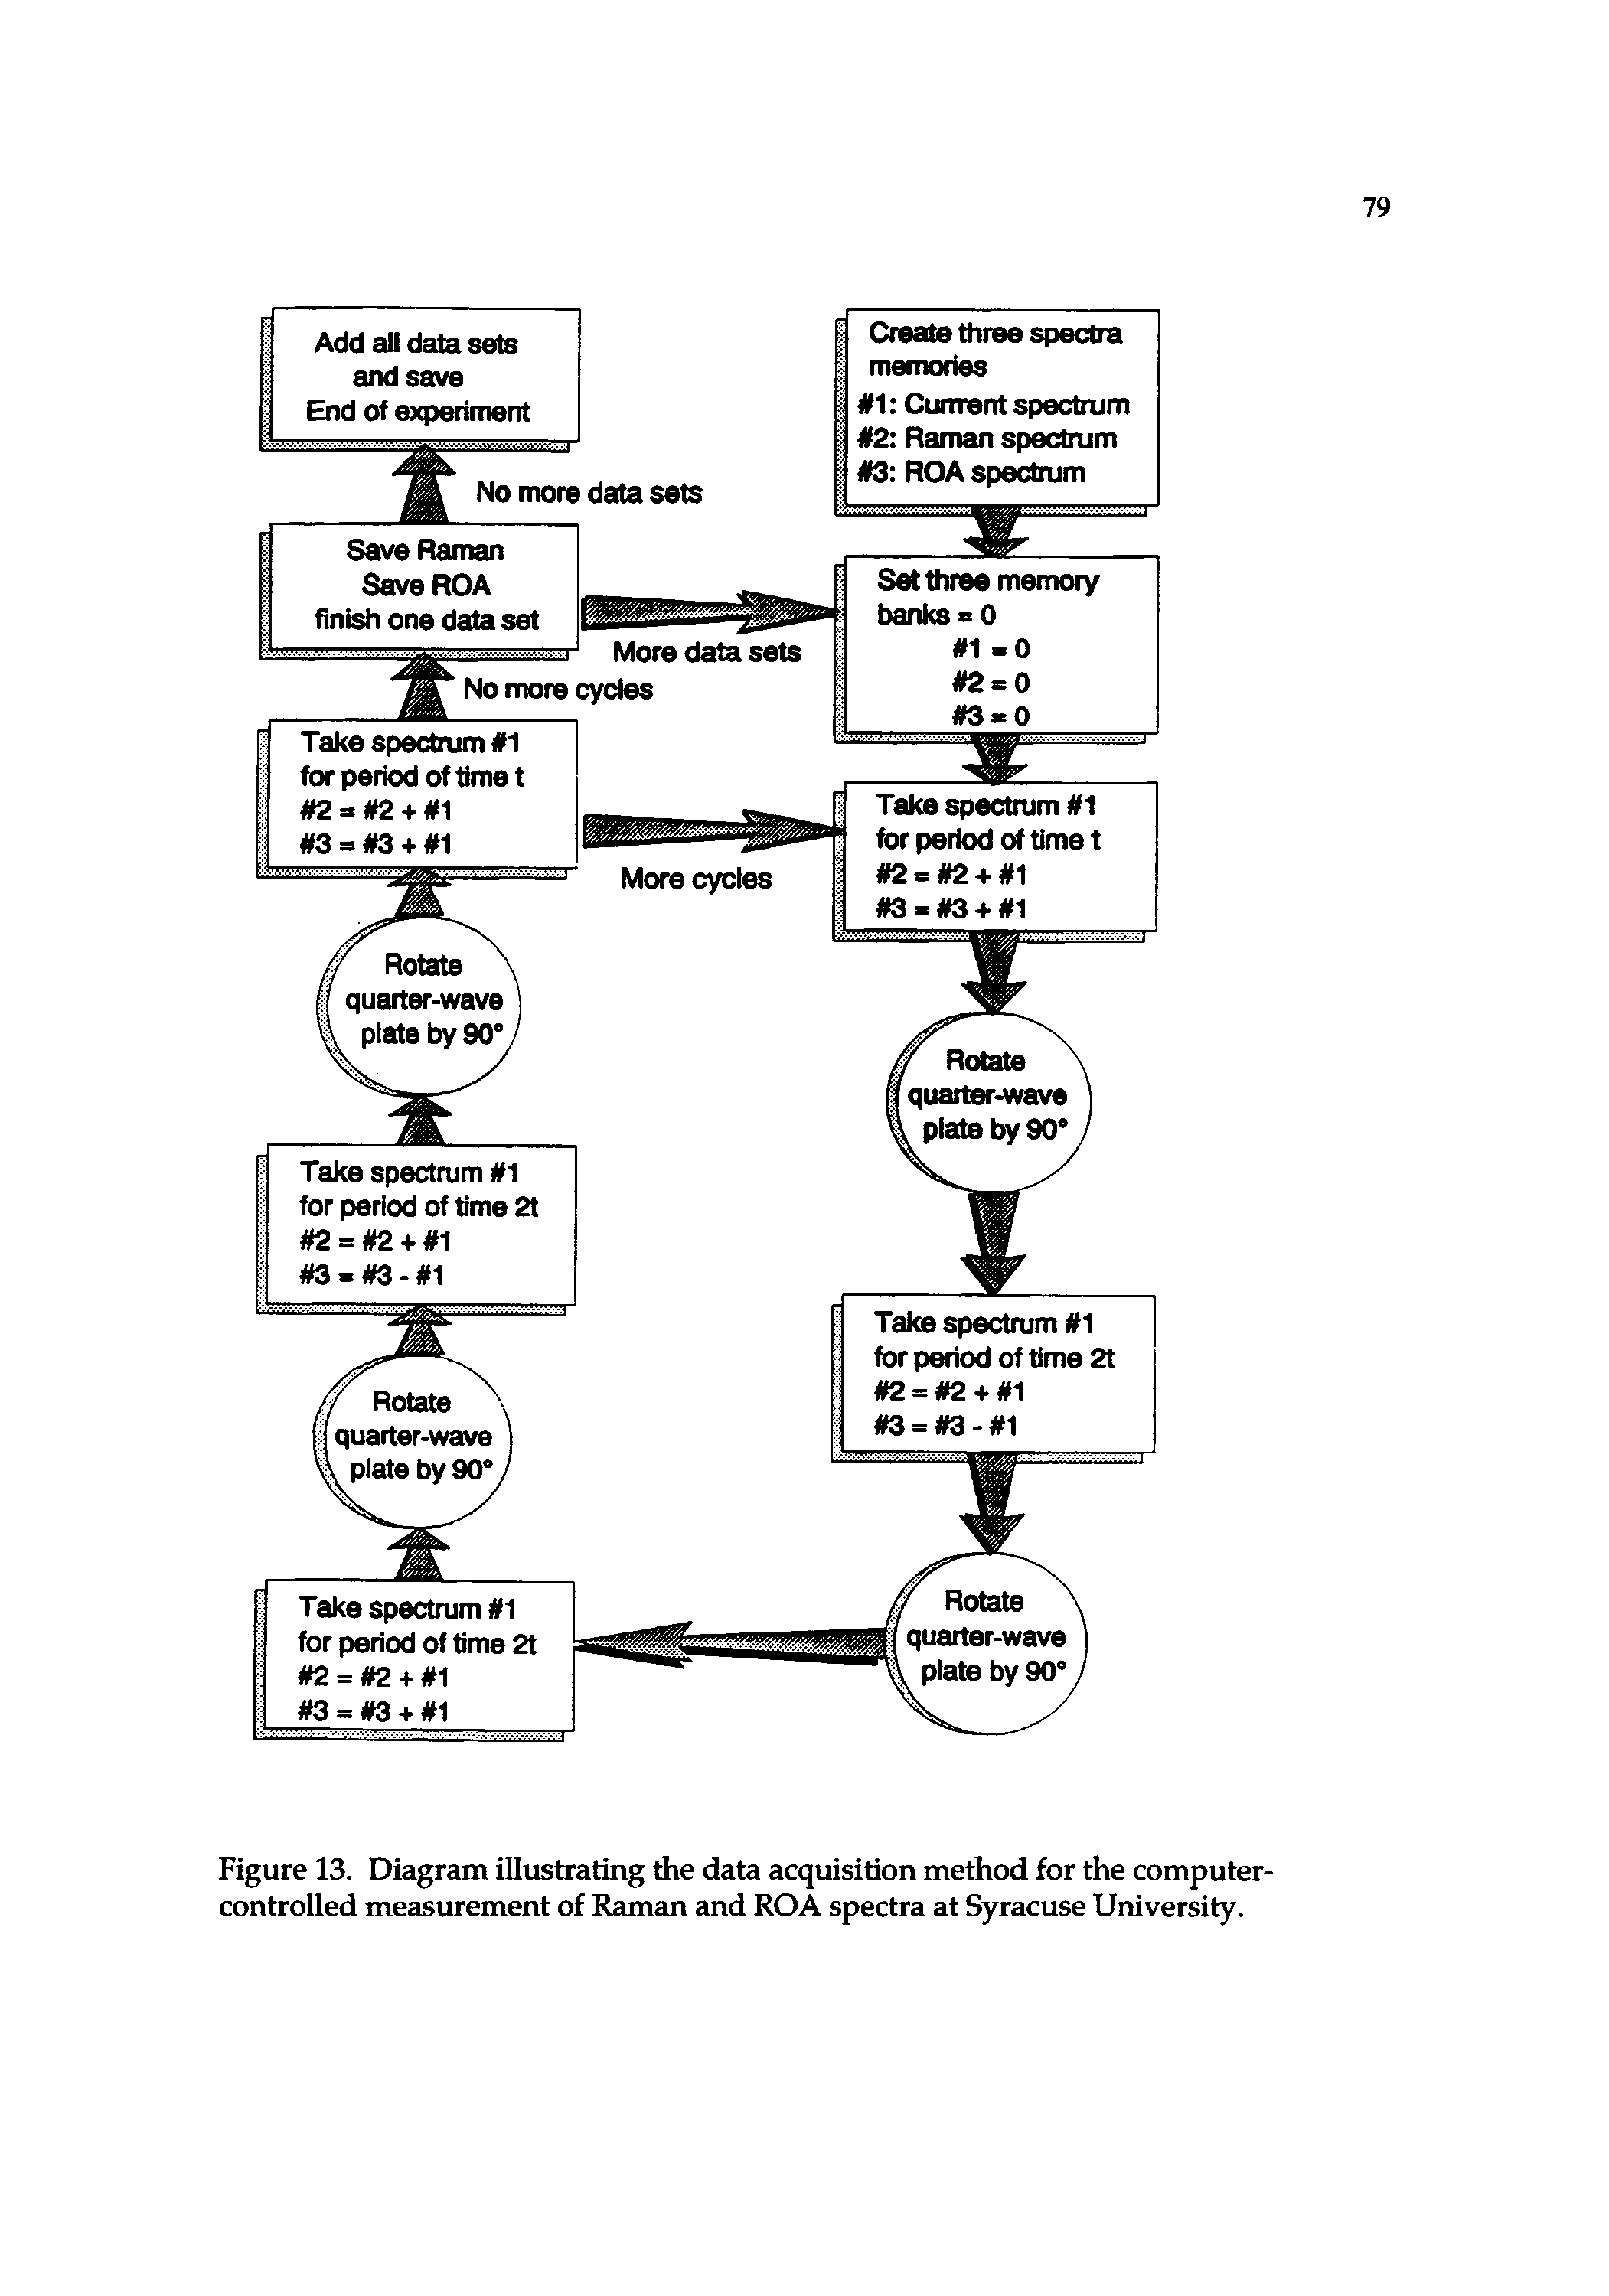 Figure 13. Diagram illustrating the data acquisition method for the computer-controlled measurement of Raman and ROA spectra at Syracuse University.